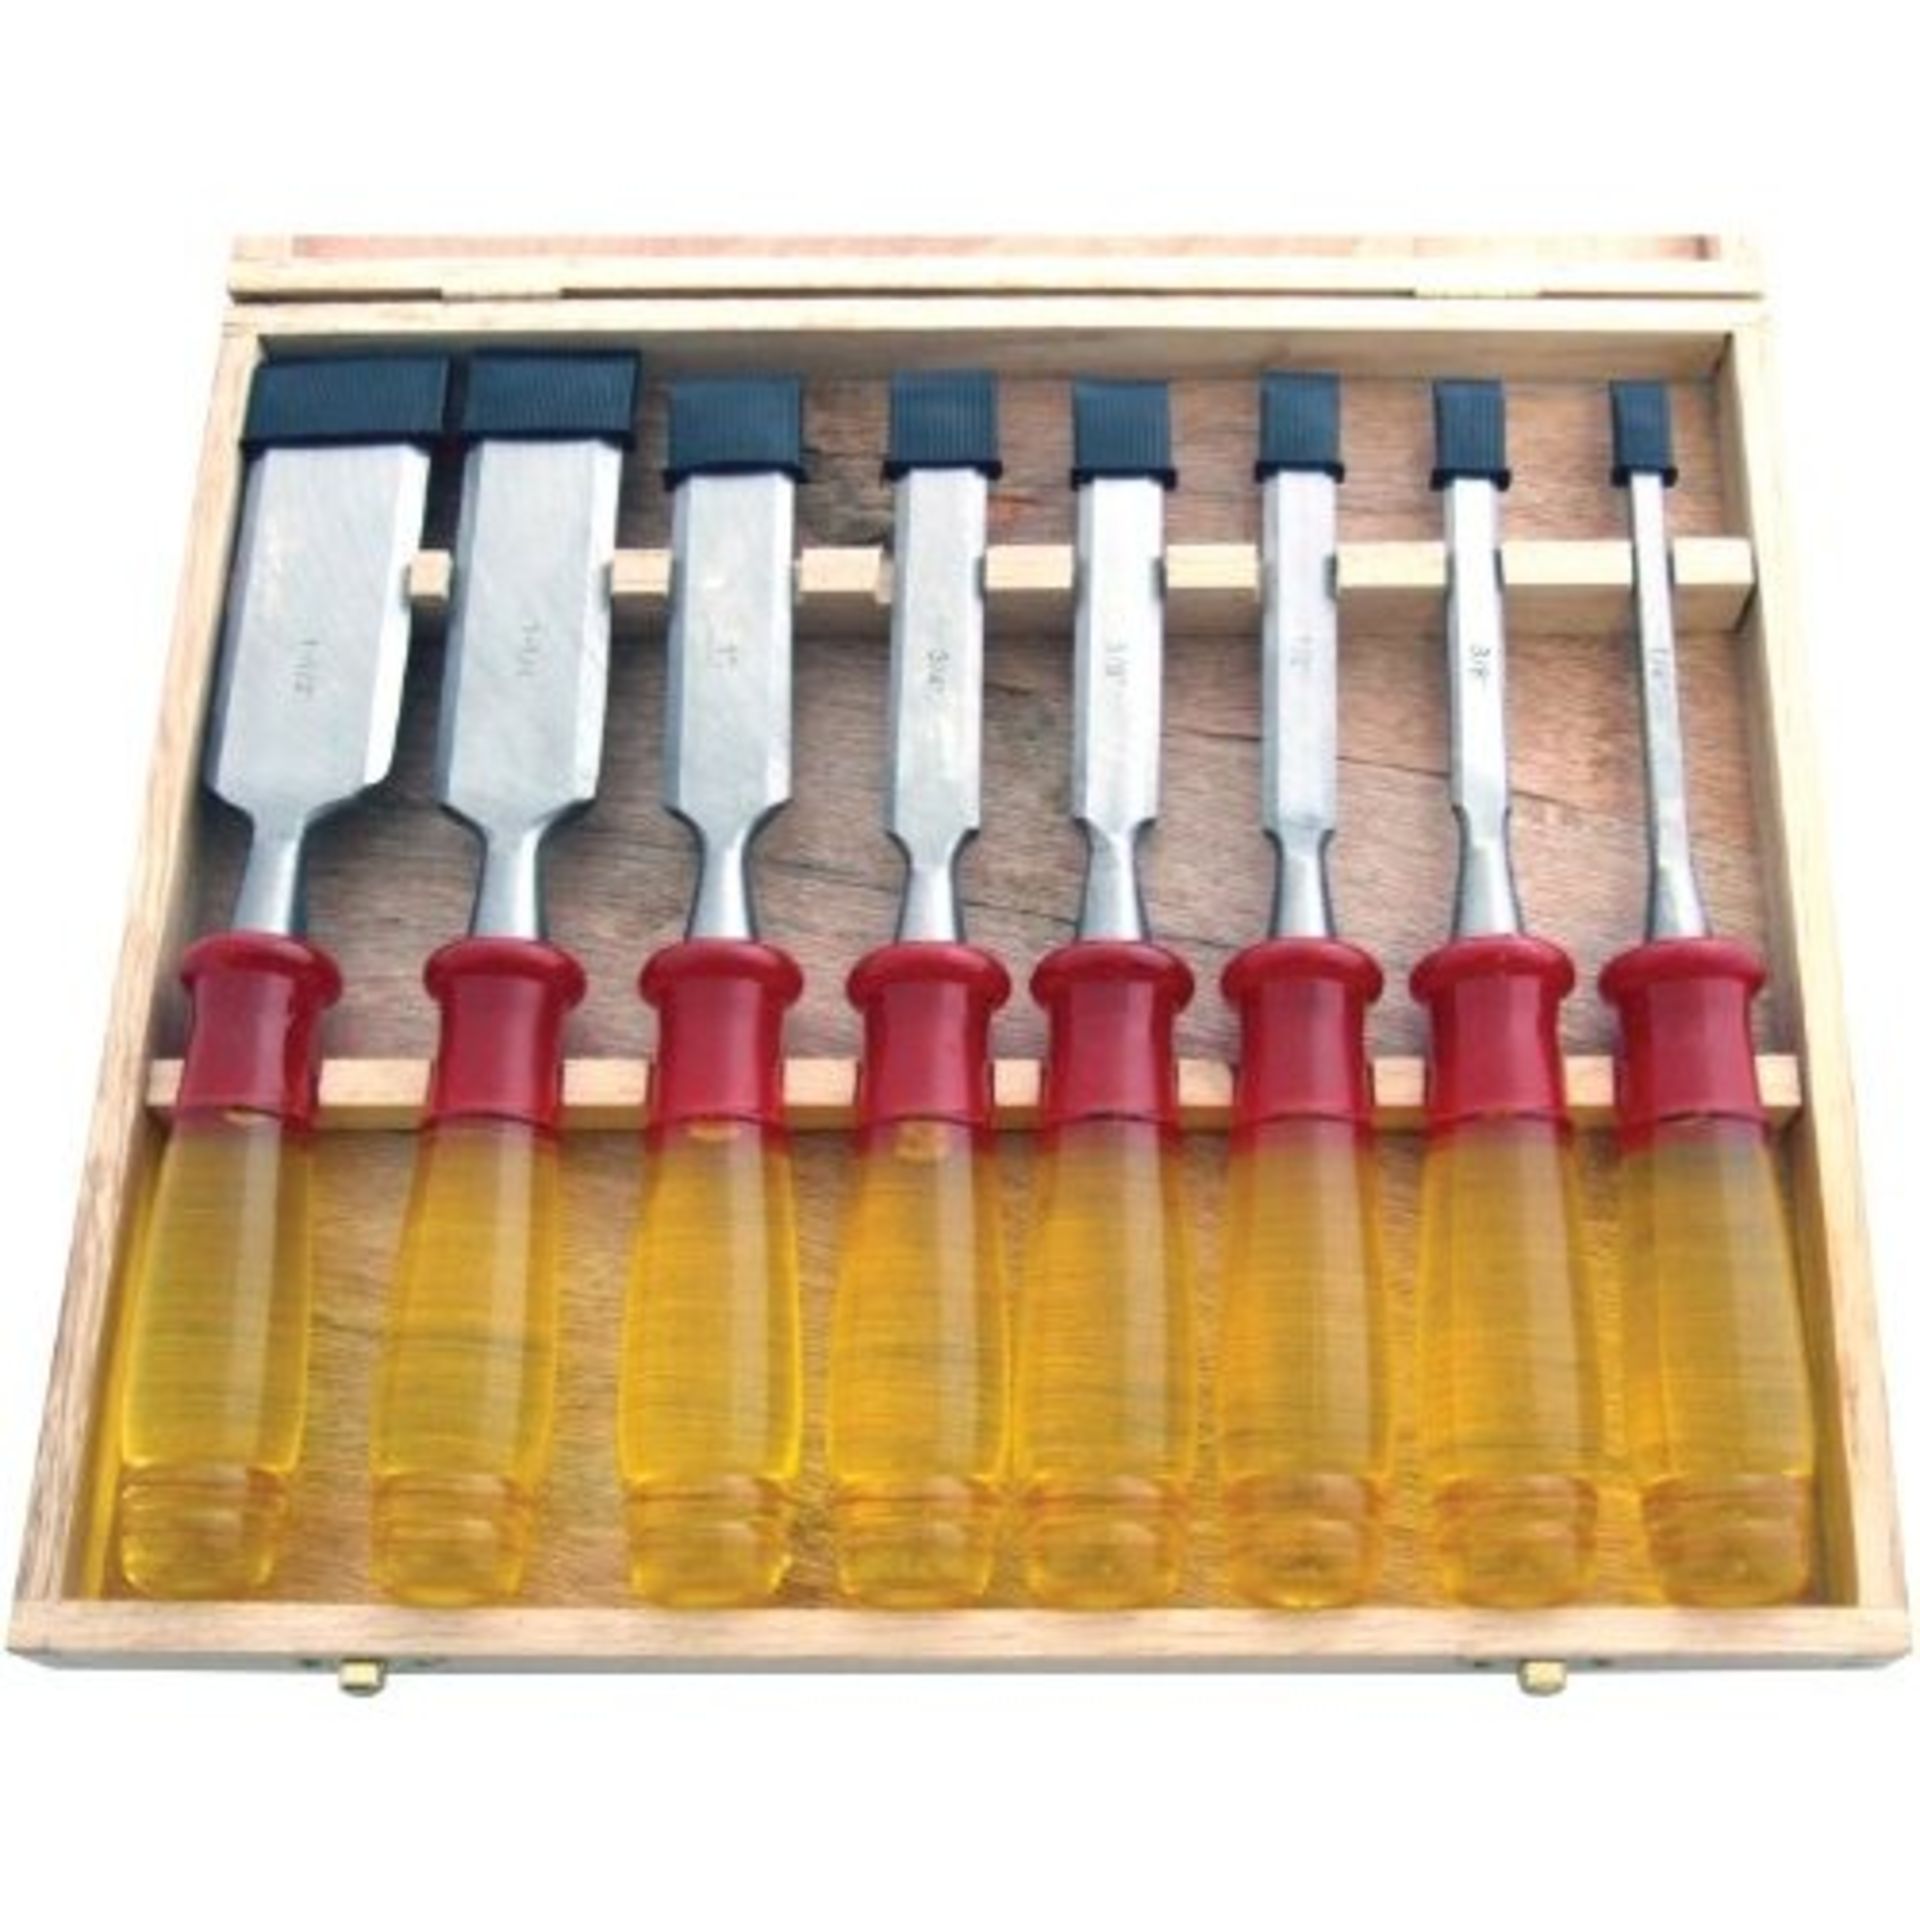 V 8 Piece Professional Chisel Set with wooden storage case